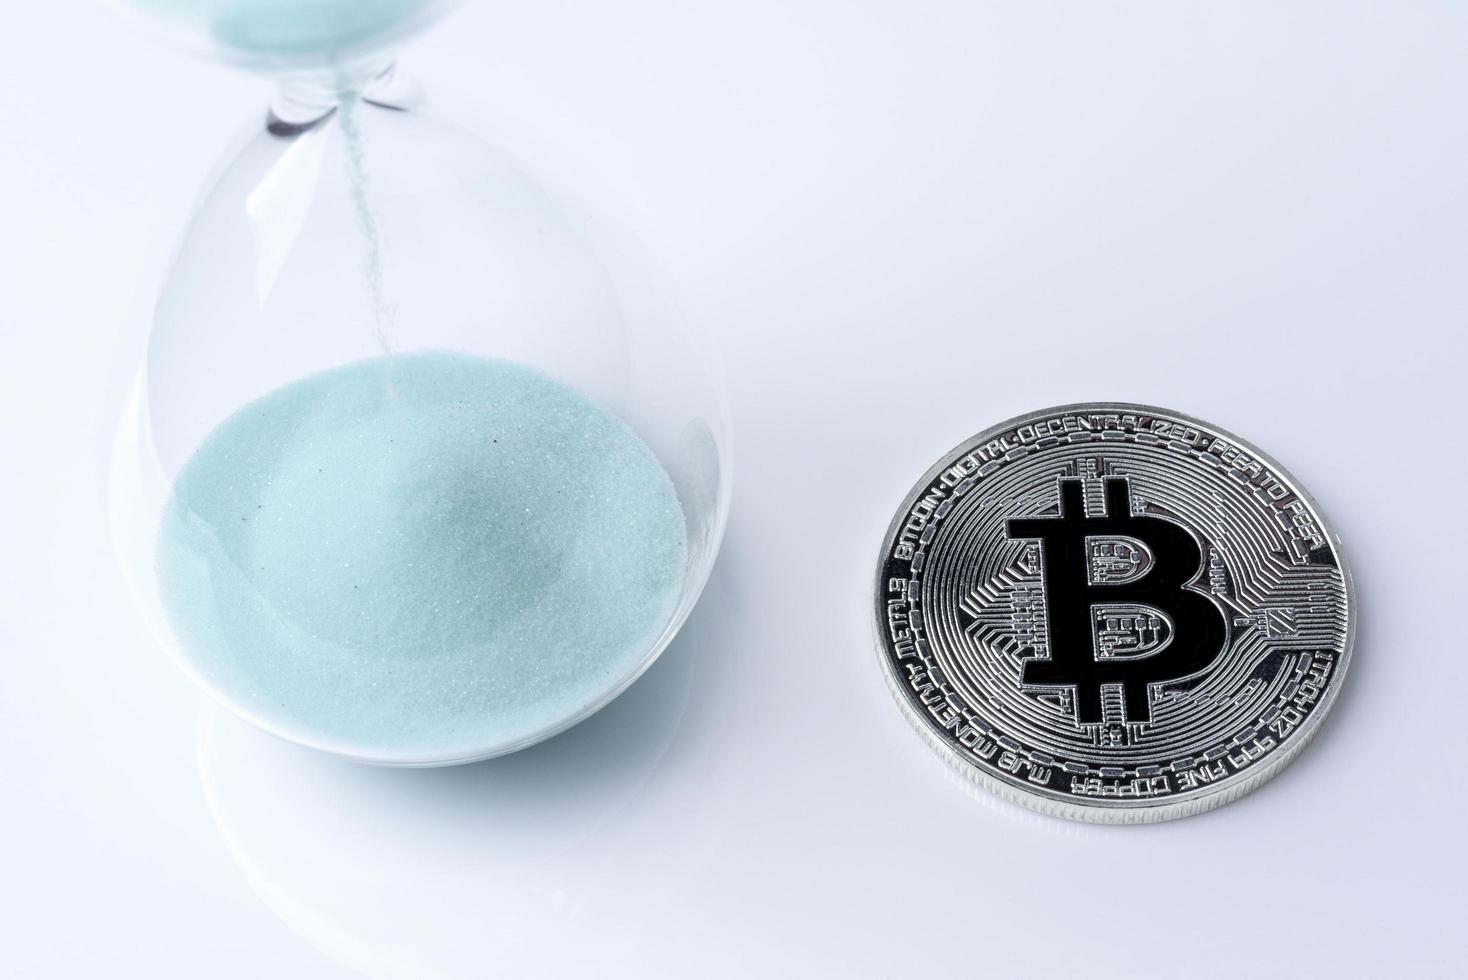 Silver bitcoin and hourglass on a white background. photo